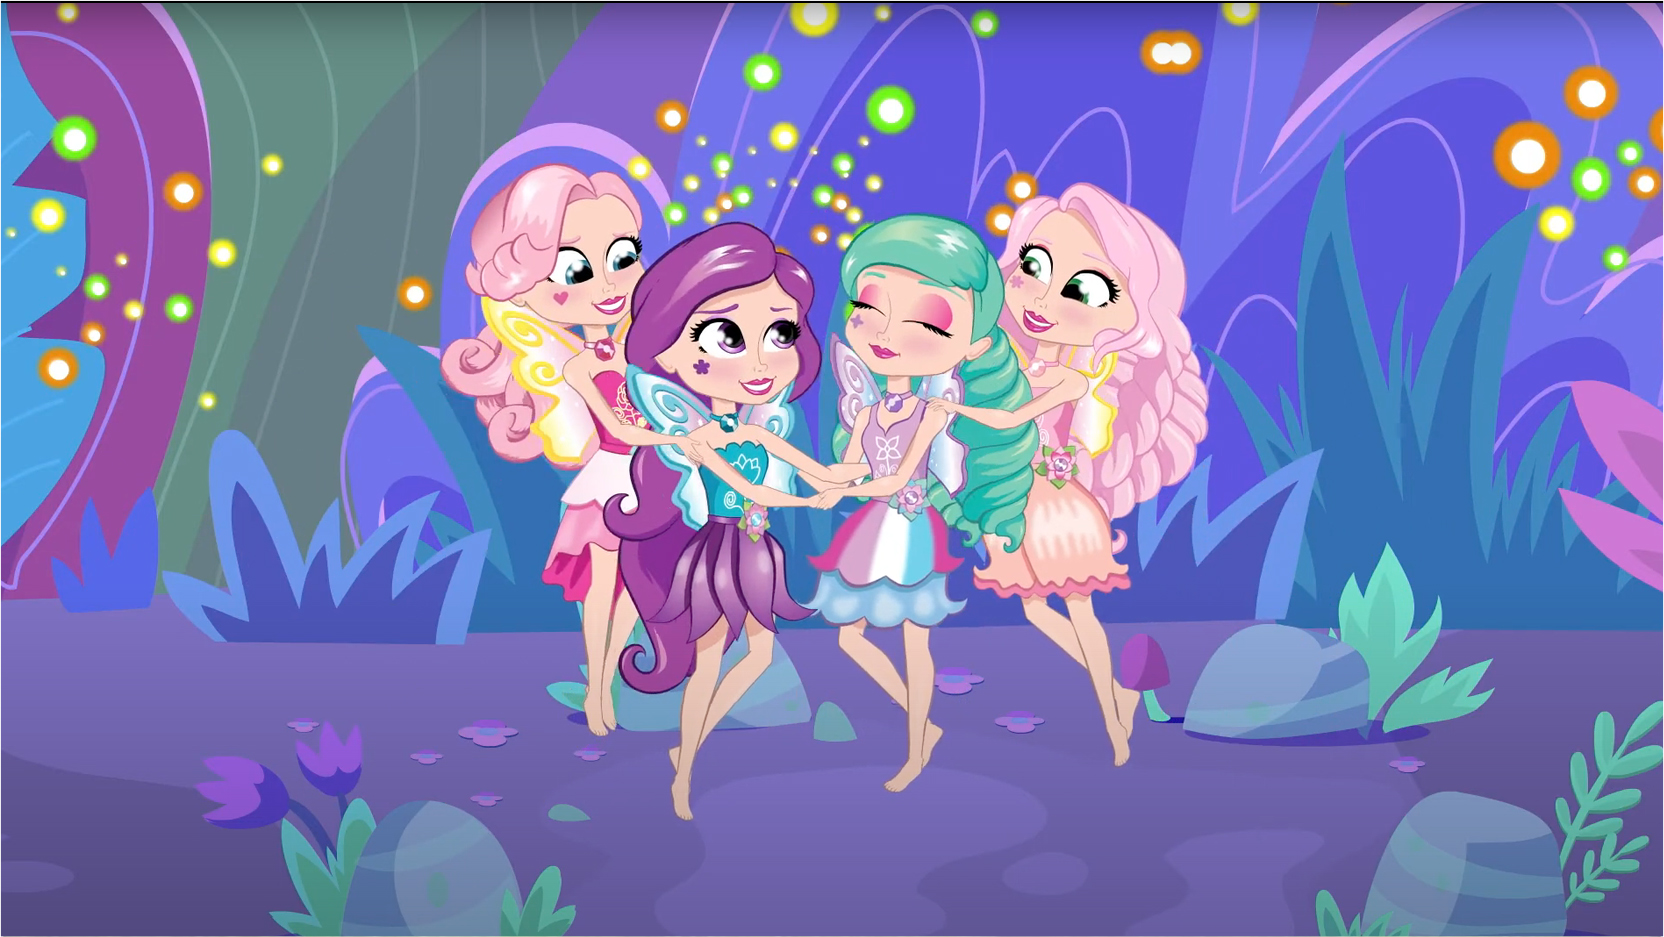 Introducing Bright Fairy Friends!